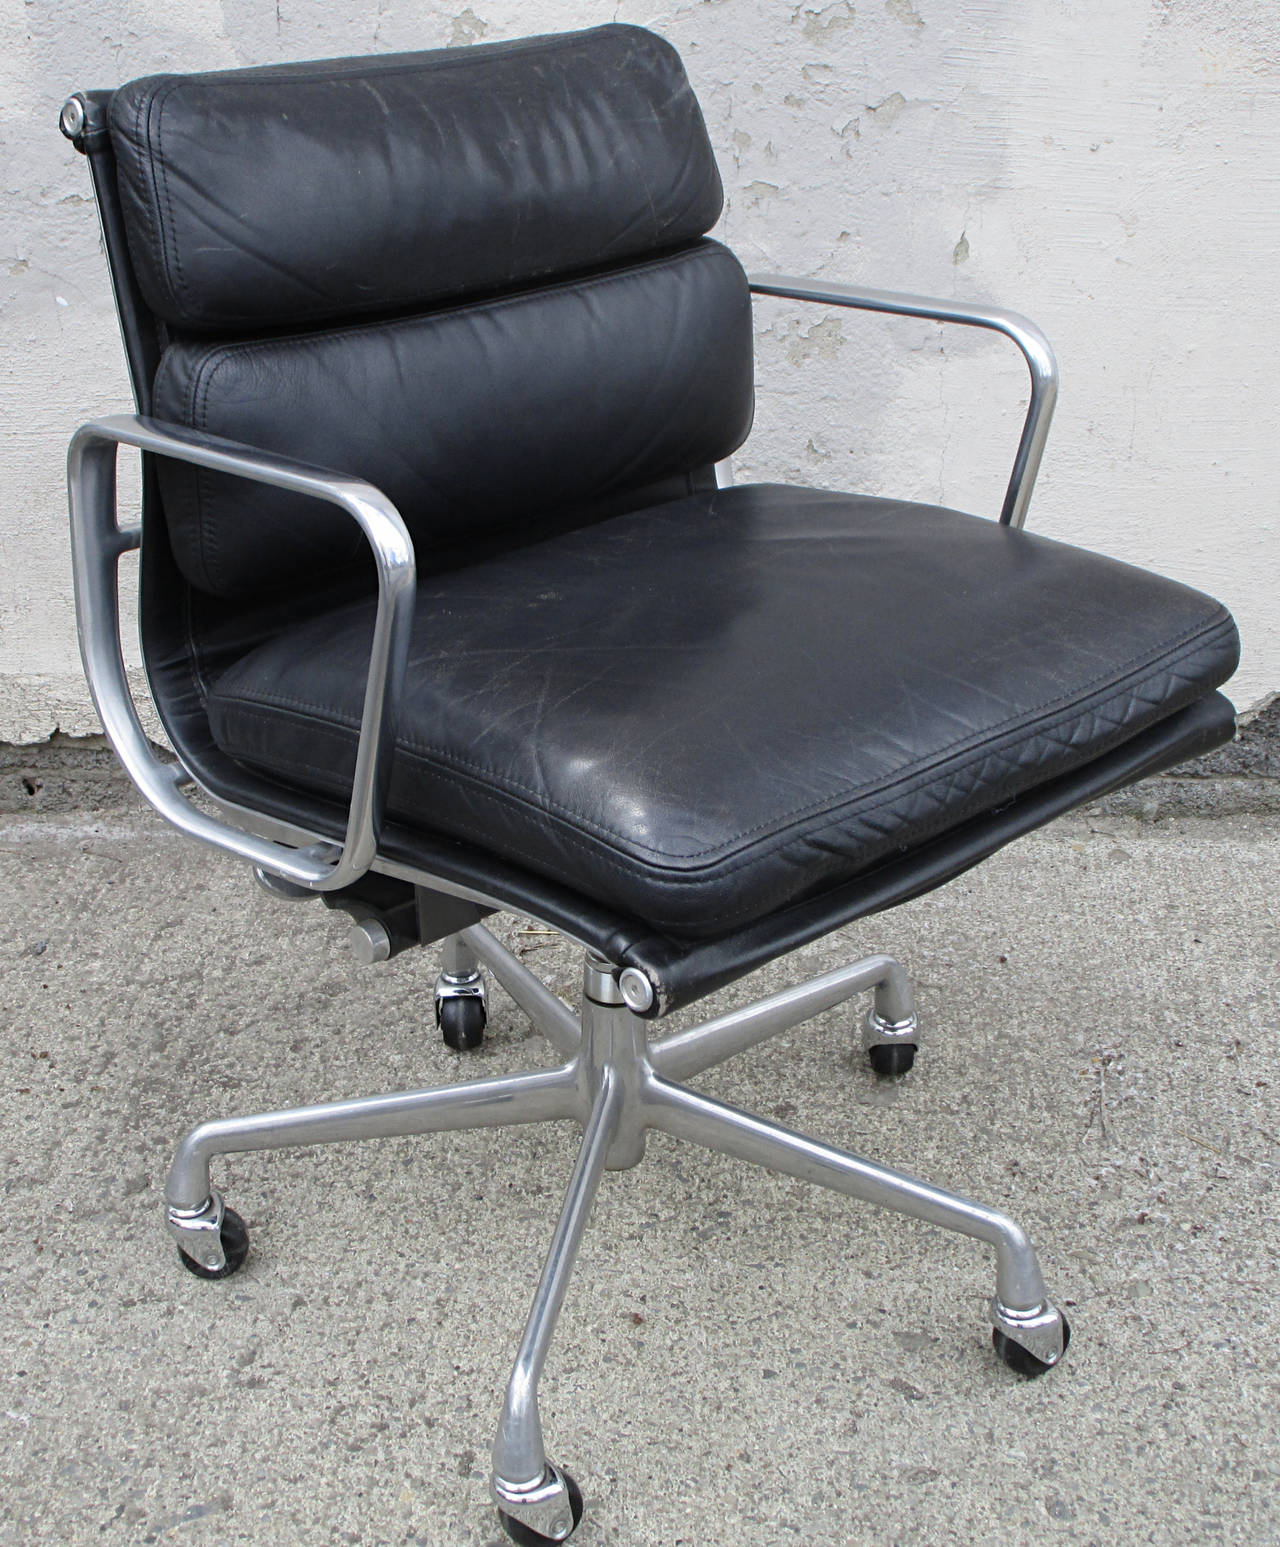 The classic Eames design from 1969 is one of the most iconic task chairs ever created. This model was produced in the late 1980s. The black leather has a rich warm patina and soft hand. Adjustable seat height and tilt. The steel and aluminum are